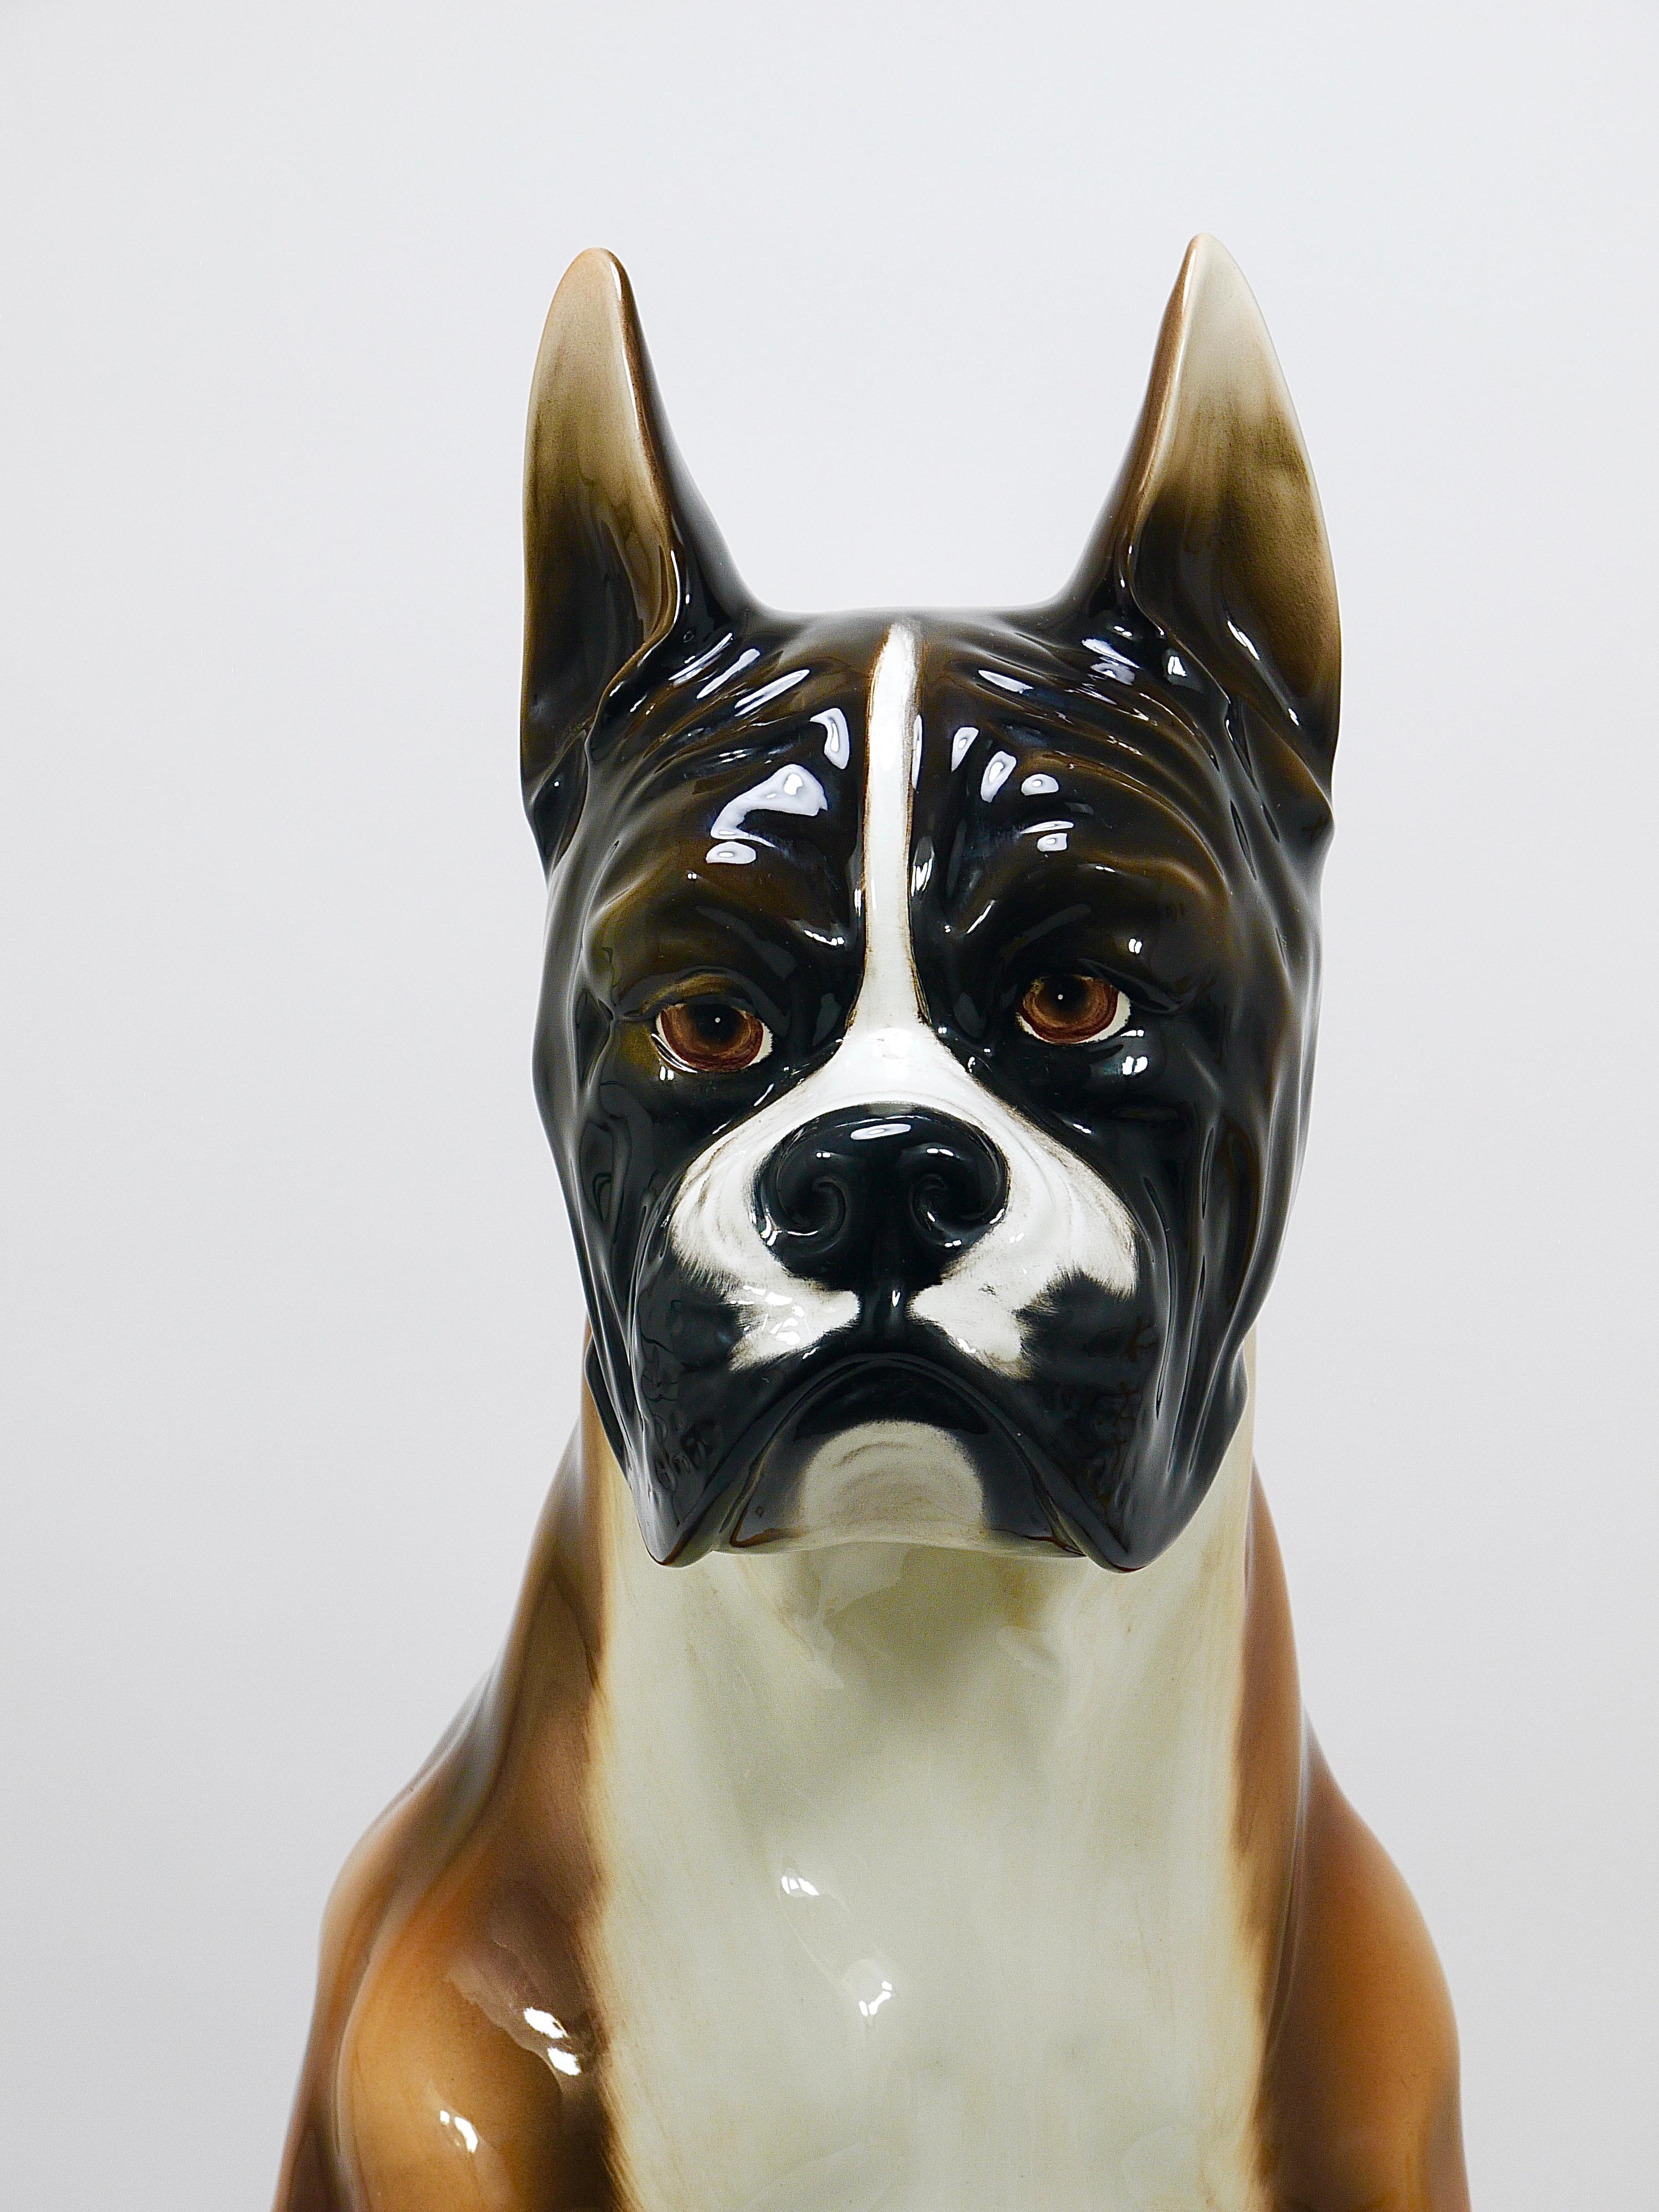 Mid-Century Modern Boxer Dog Life-Size Majolica Statue Sculpture, Glazed Ceramic, Italy, 1970s For Sale